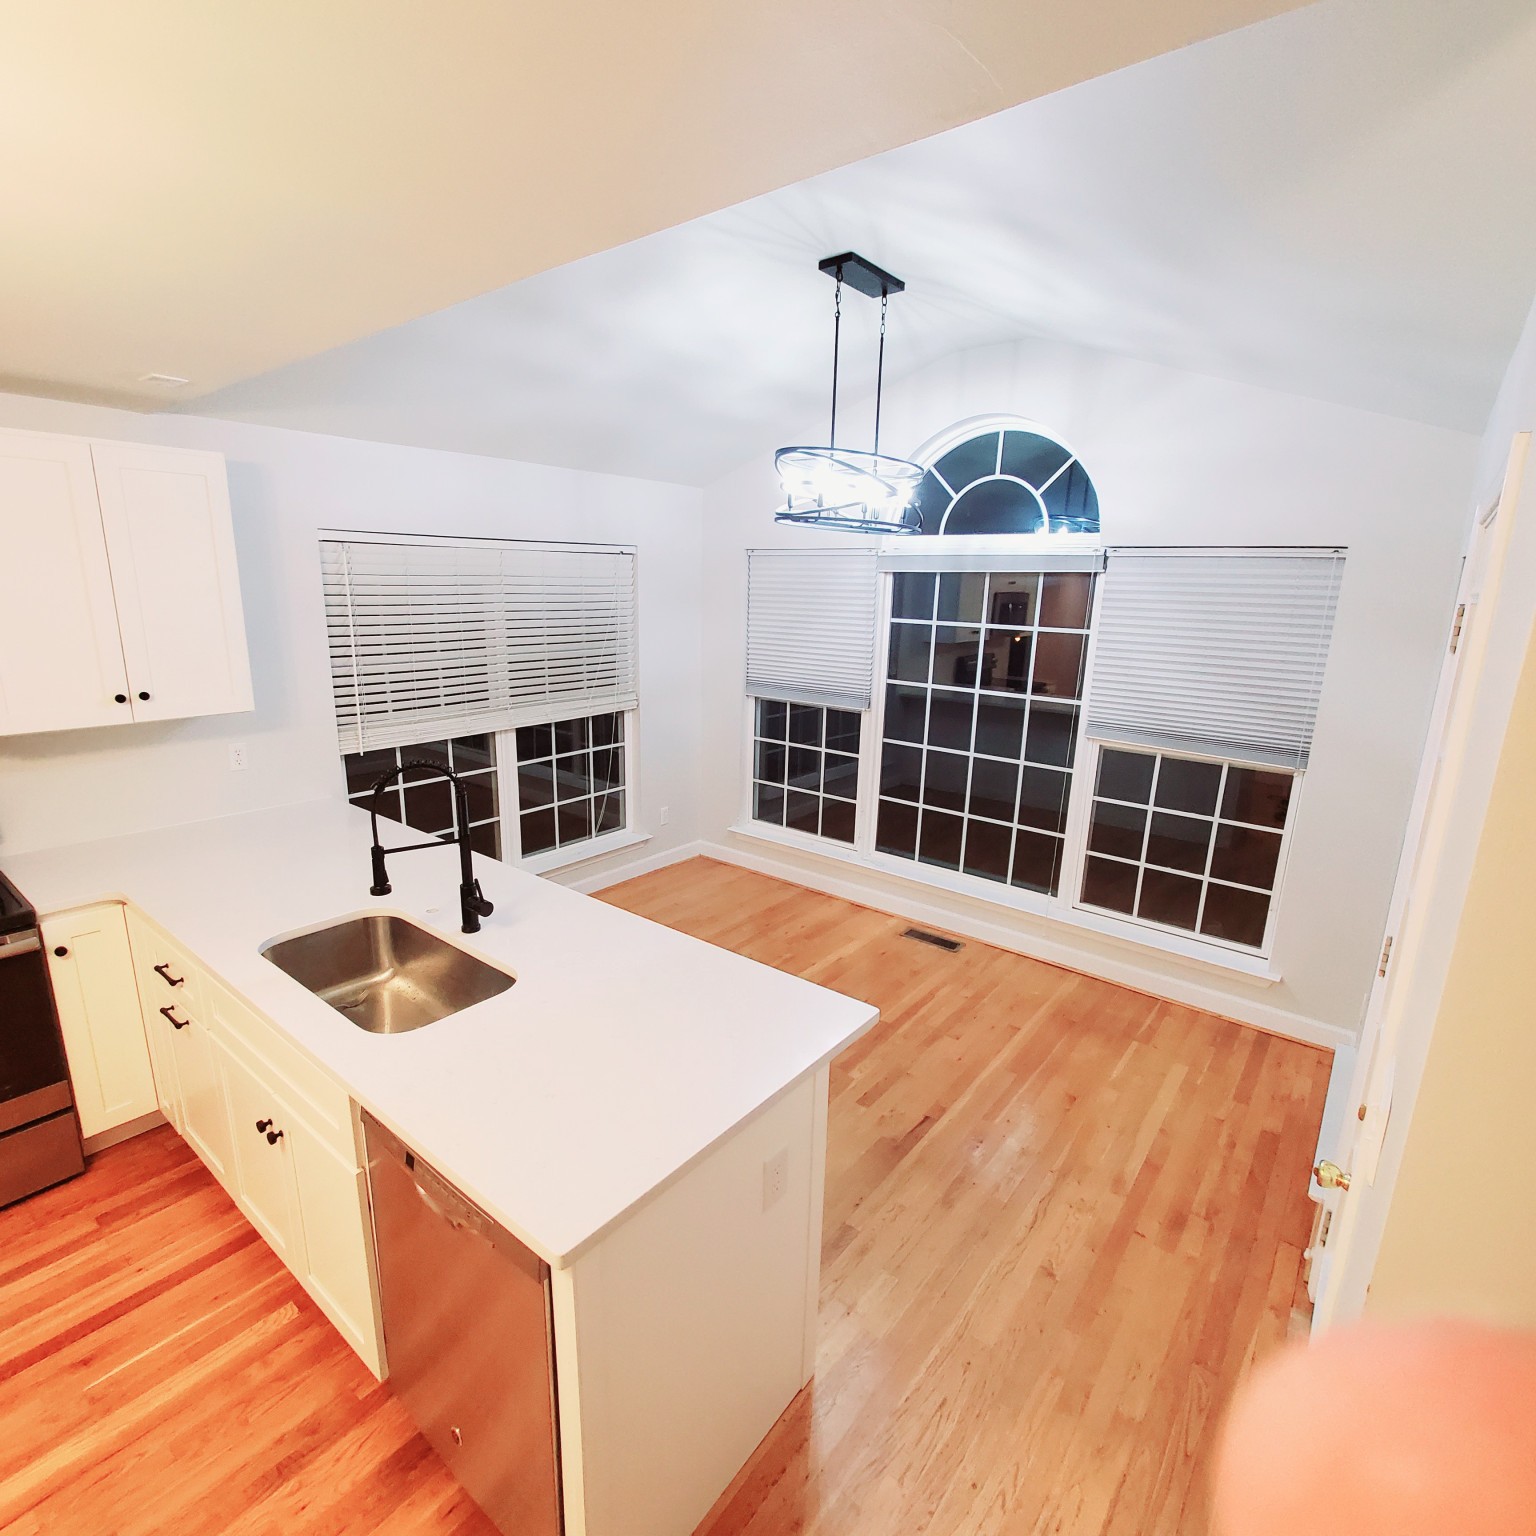 a view of a kitchen with a sink and cabinets